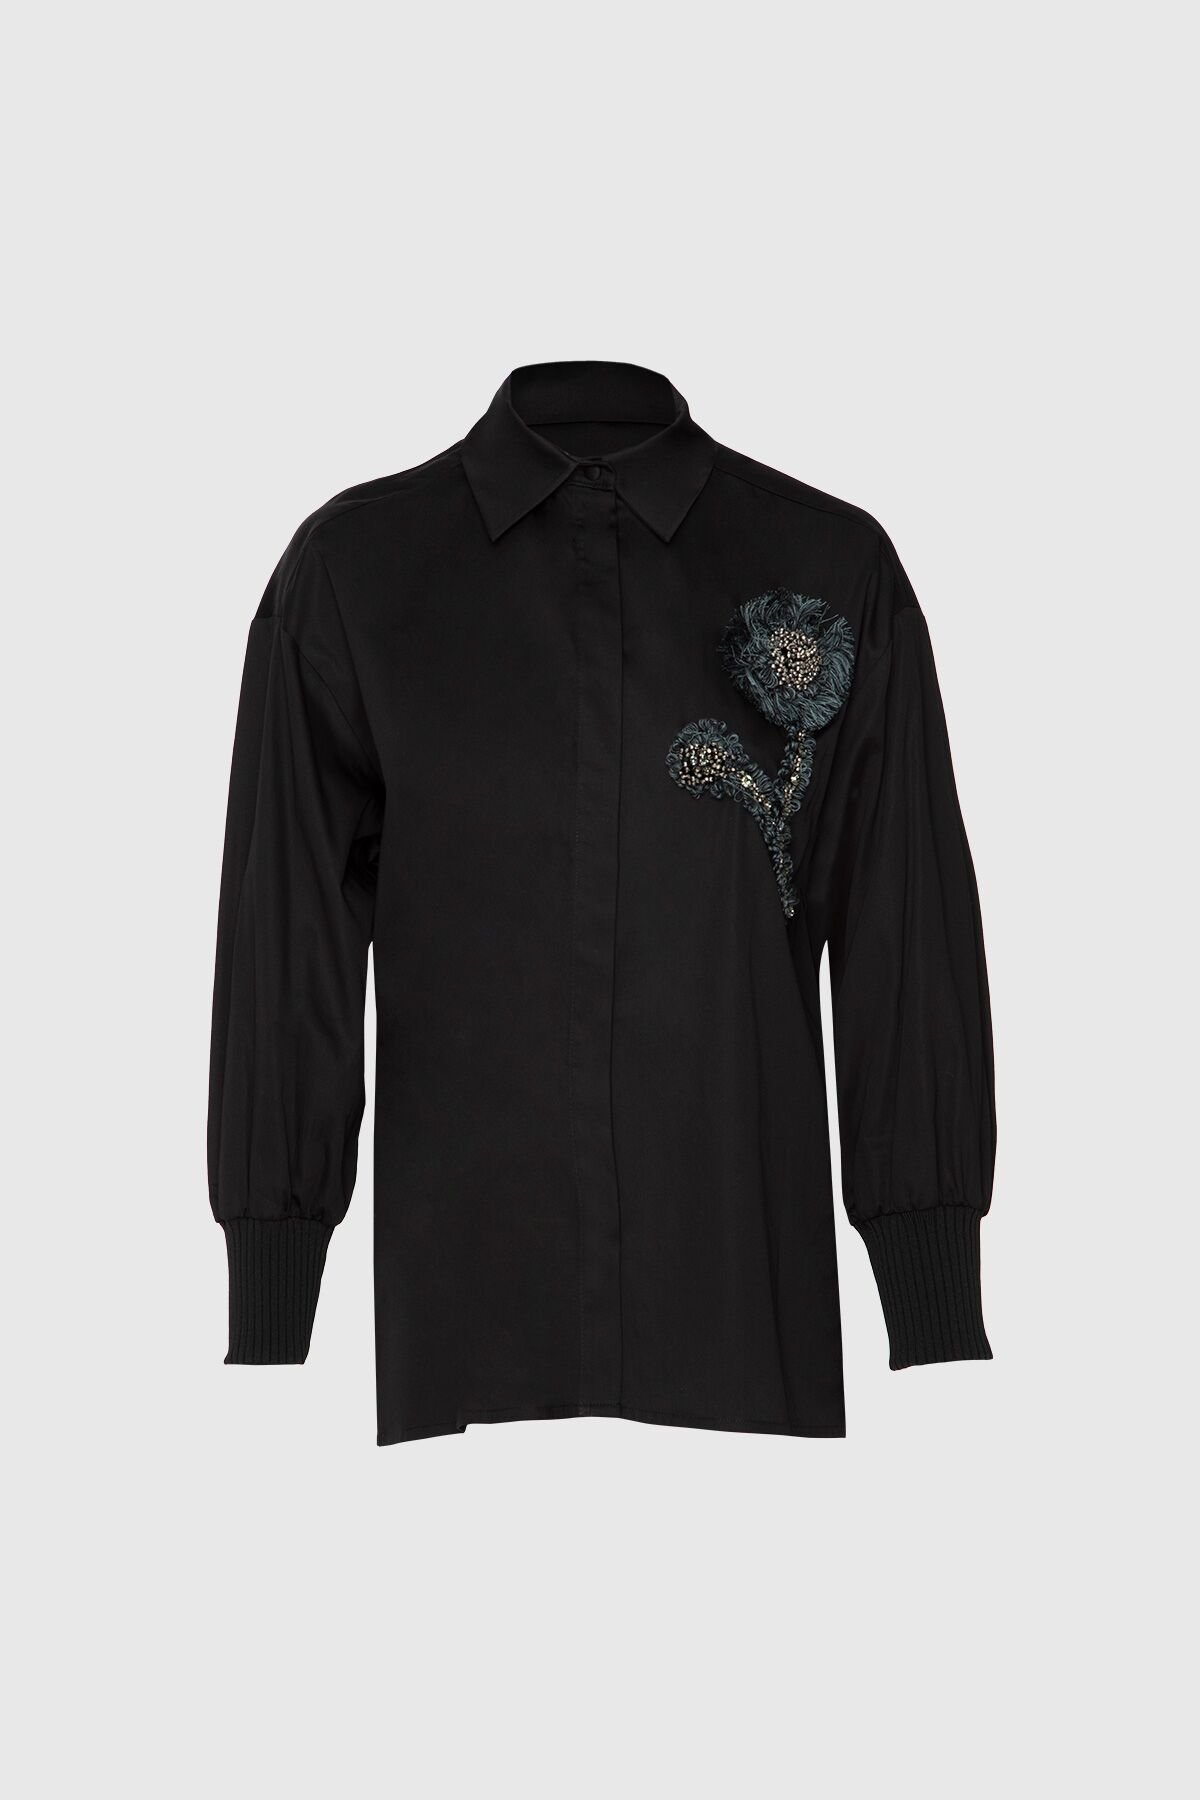 With Embroidery And Embroidered Sleeves Knitted Oversized Black Shirt